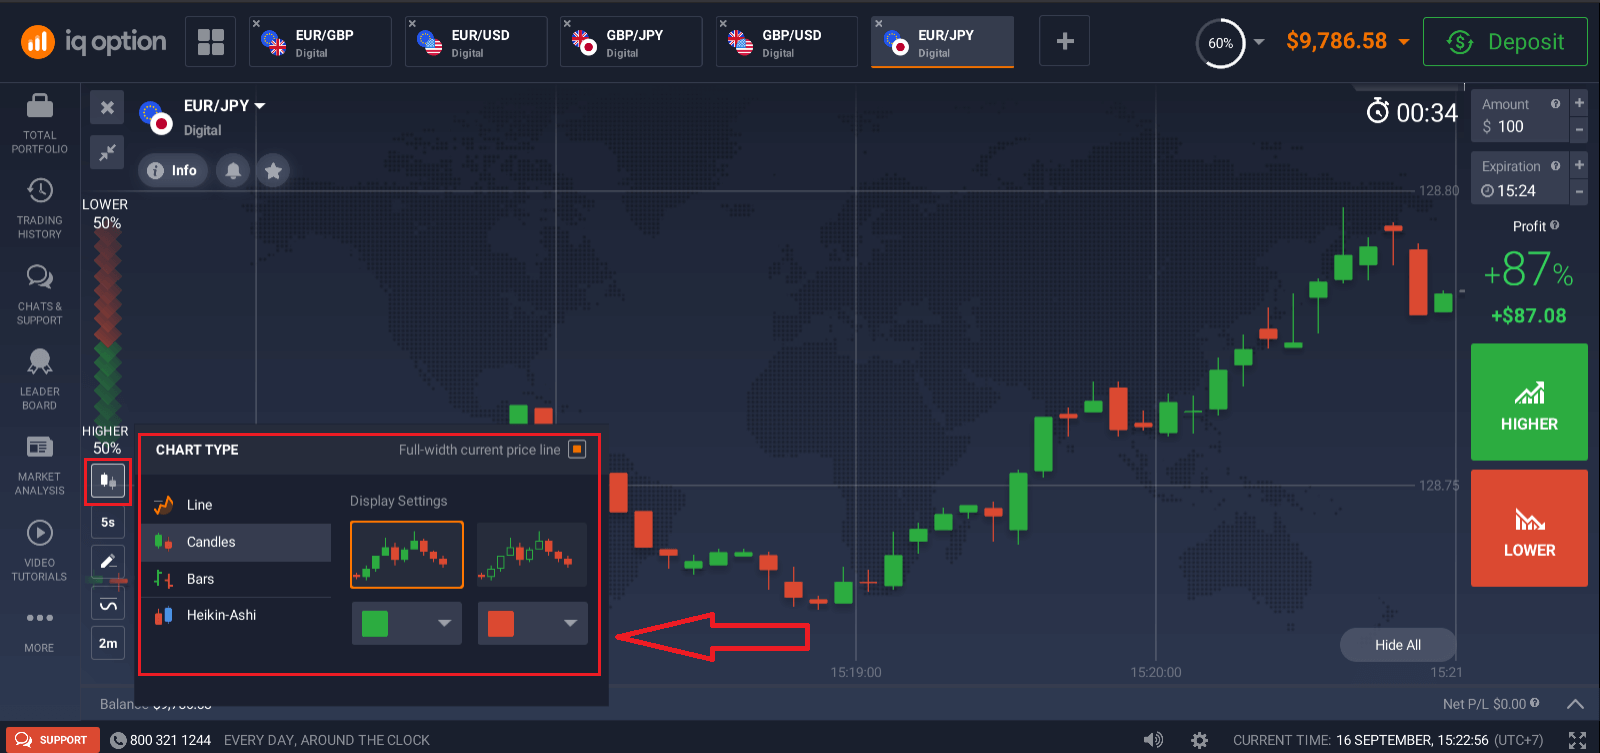 How to Trade Binary Options in IQ Option